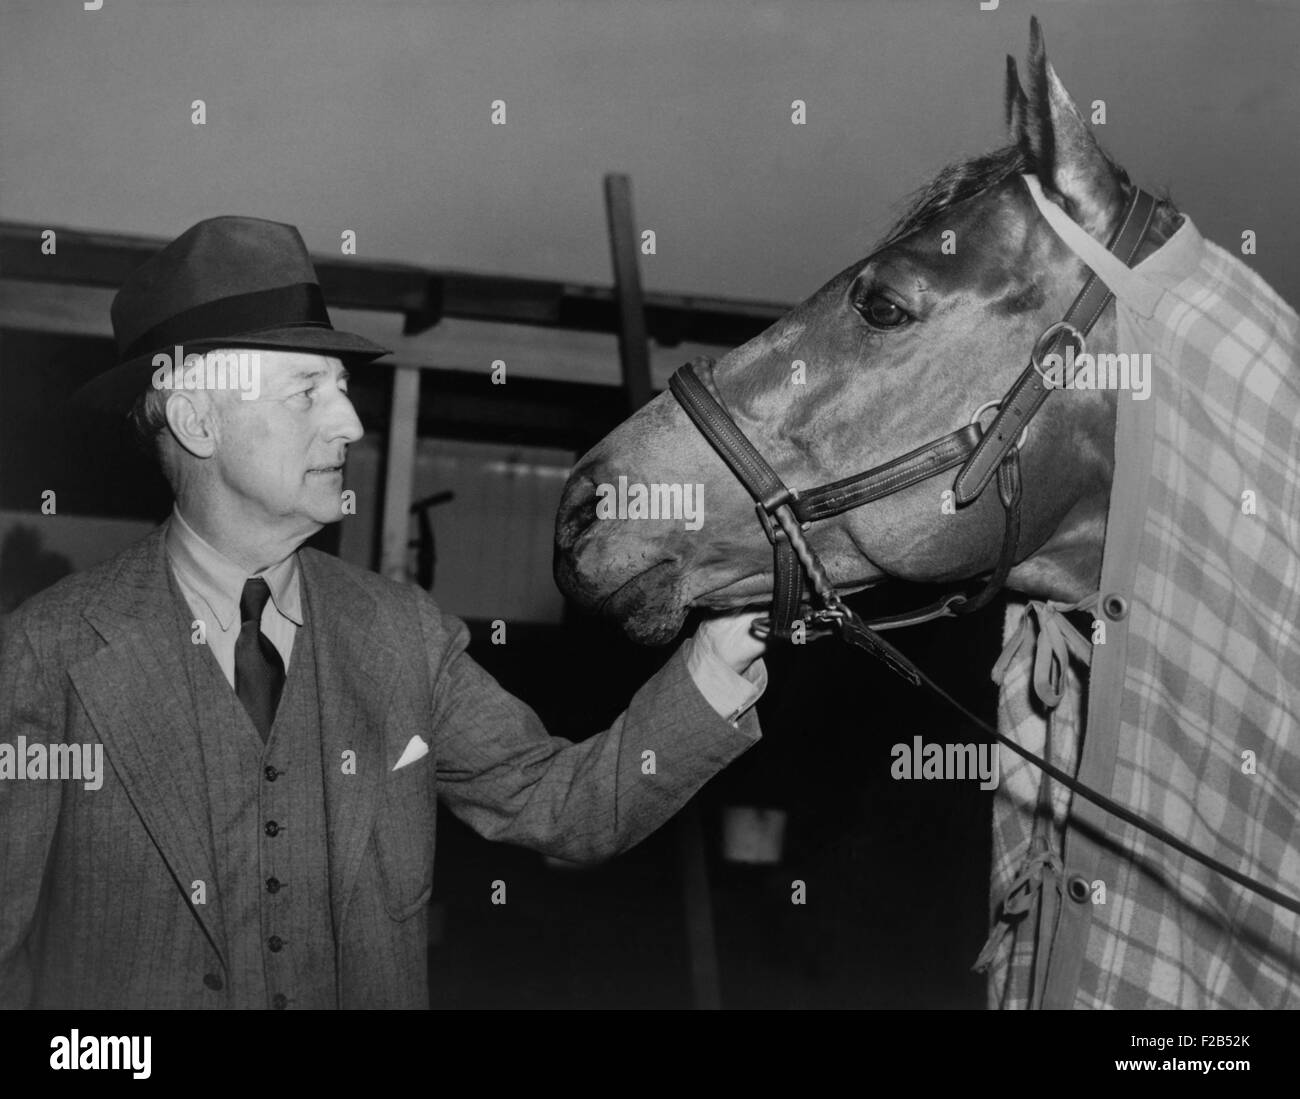 Charles Howard admiring his horse Seabiscuit, March 5, 1940. Seabiscuit had just won the Santa Anita Handicap. - (BSLOC 2015 1 124) Stock Photo